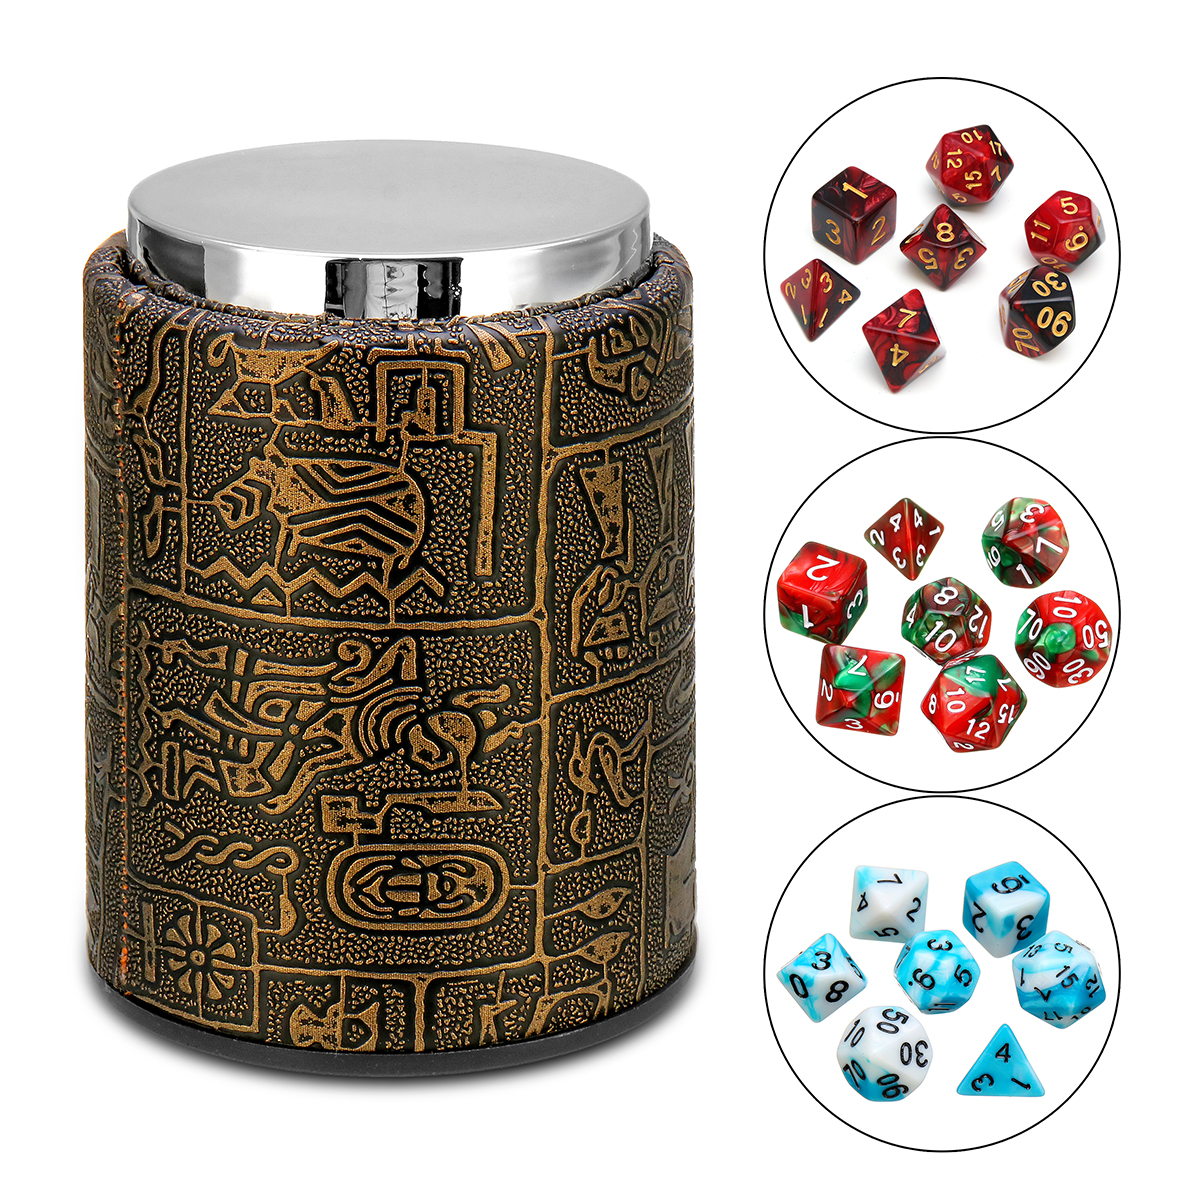 

7 Pcs Polyhedral Dices With Dice Cup Role Playing Game Dices Set RPG MTG Desk Game Multisided Dices